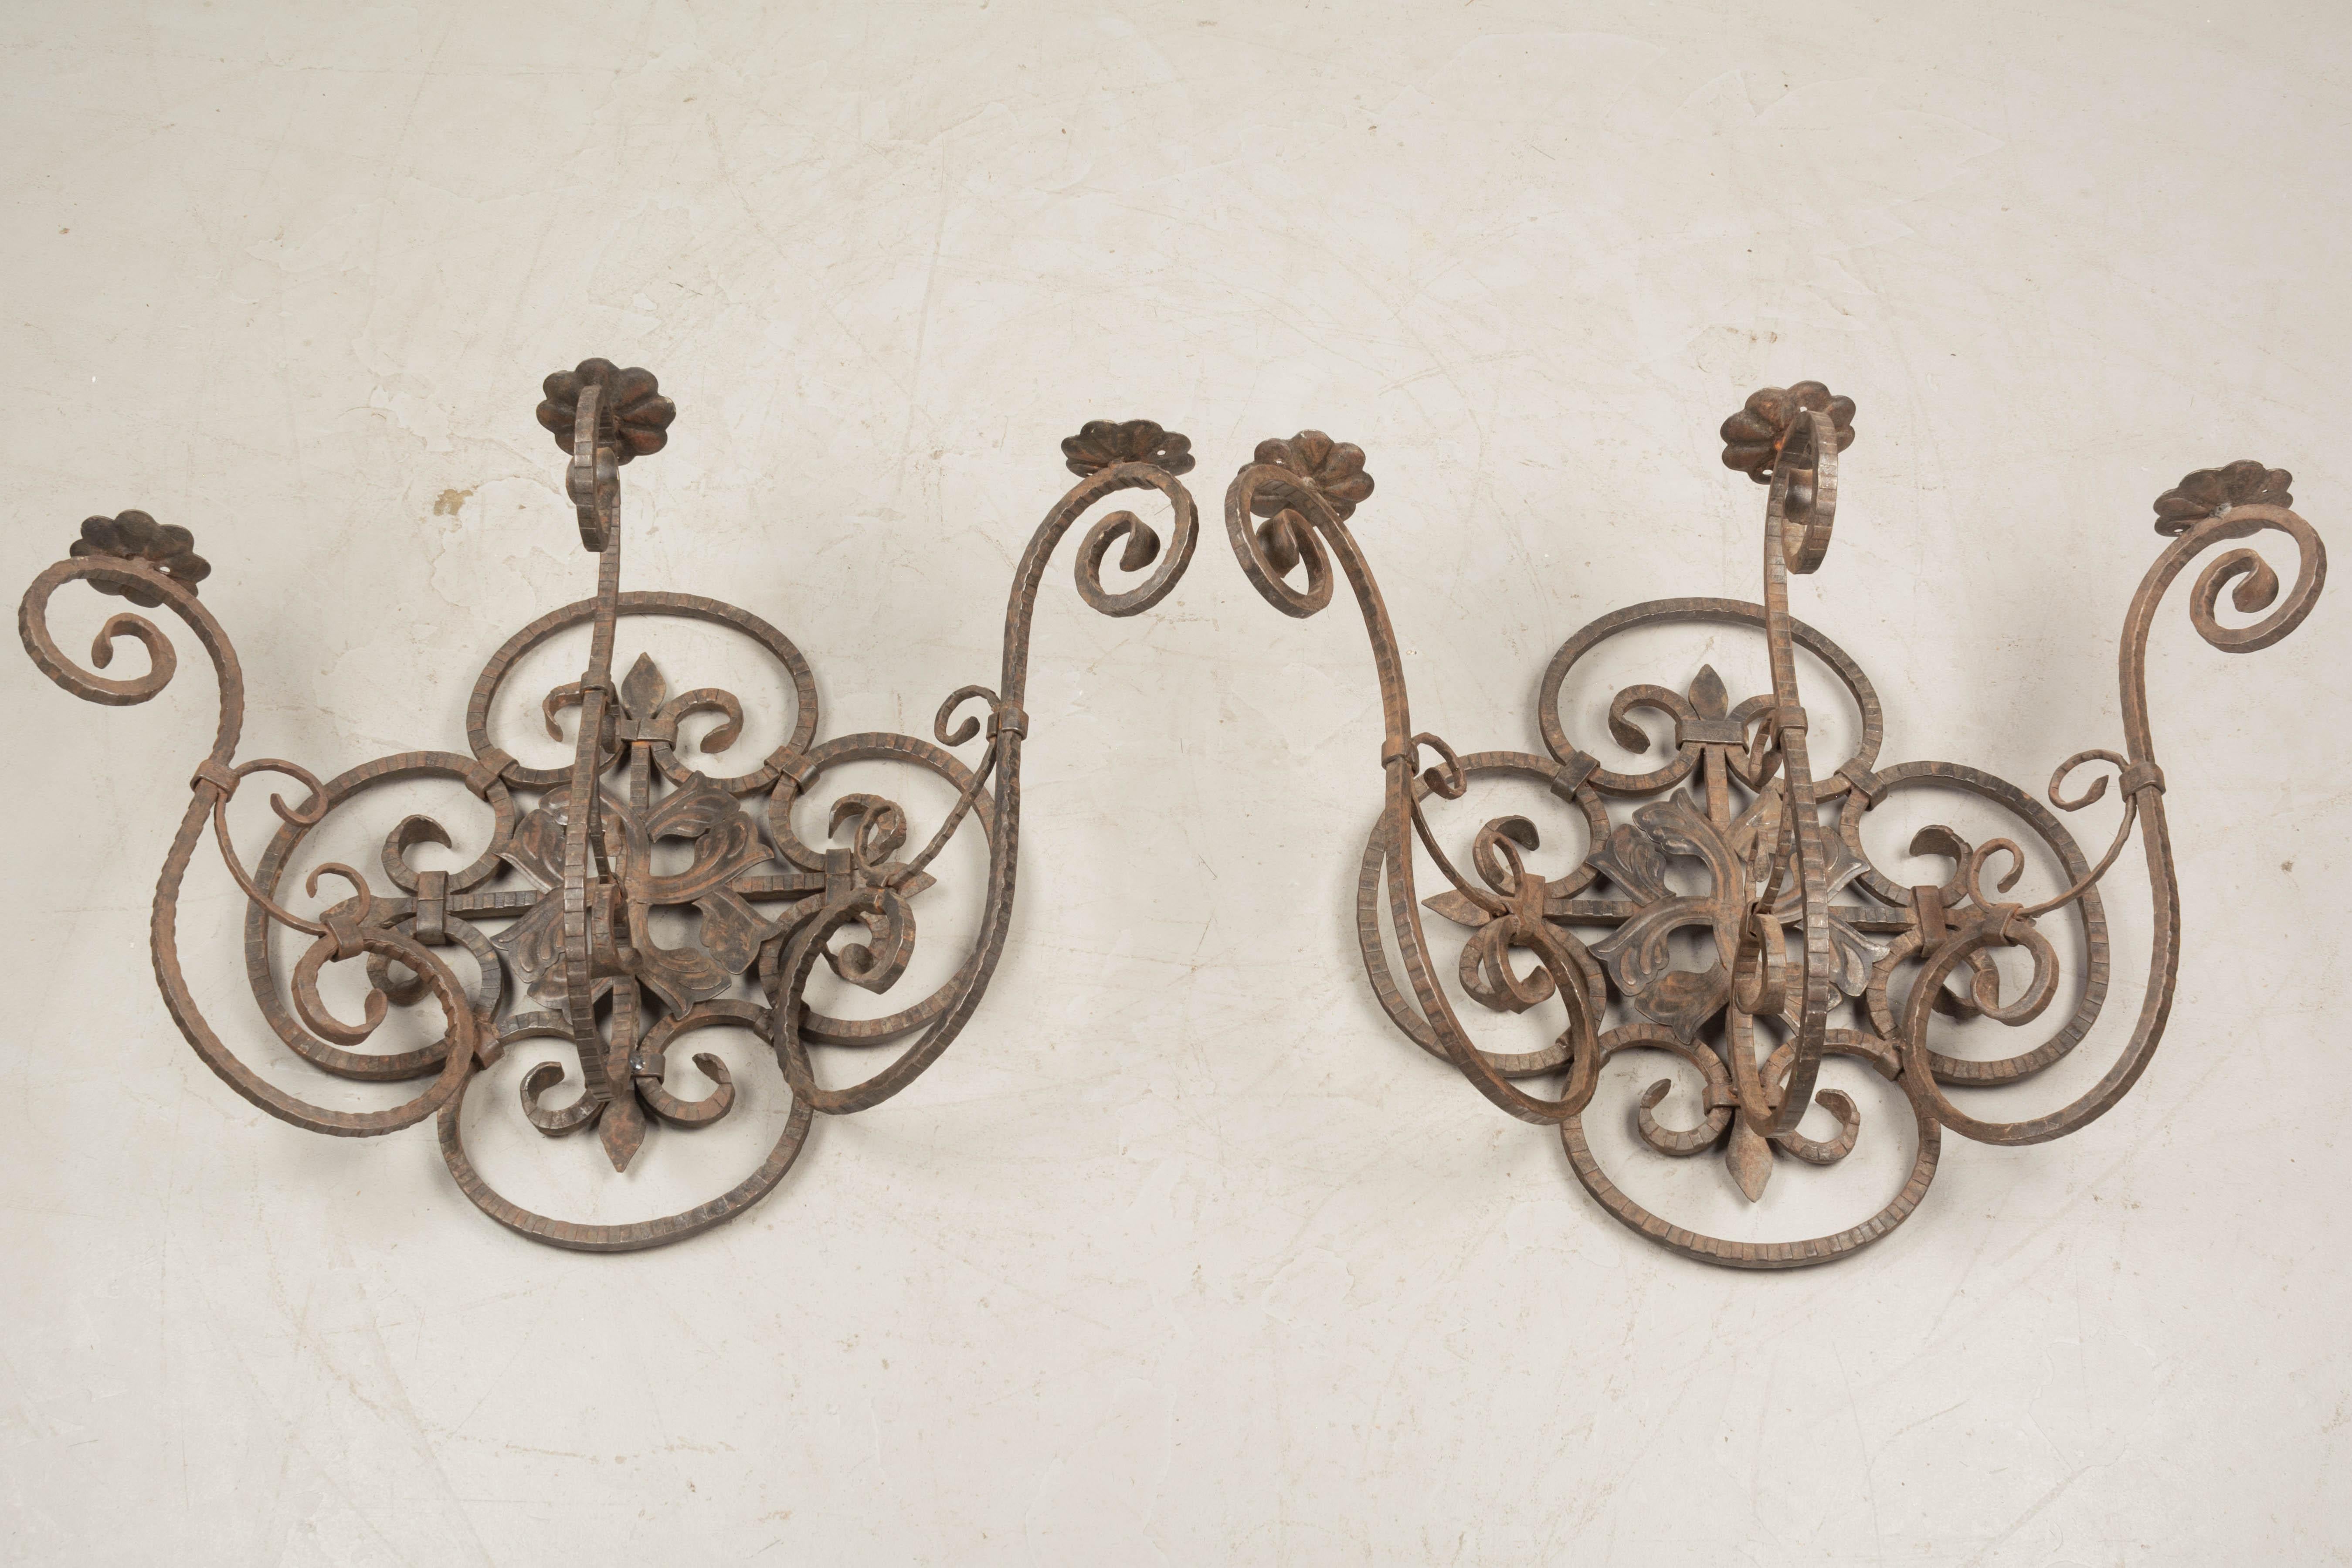 A pair of large French wrought iron and tôle three-light candle sconces with scroll form and rusty bronze patina. Good quality ironwork with nice aged patina. Not wired. Two arms have been repaired. Circa 1920s. 
Dimensions: 29.5